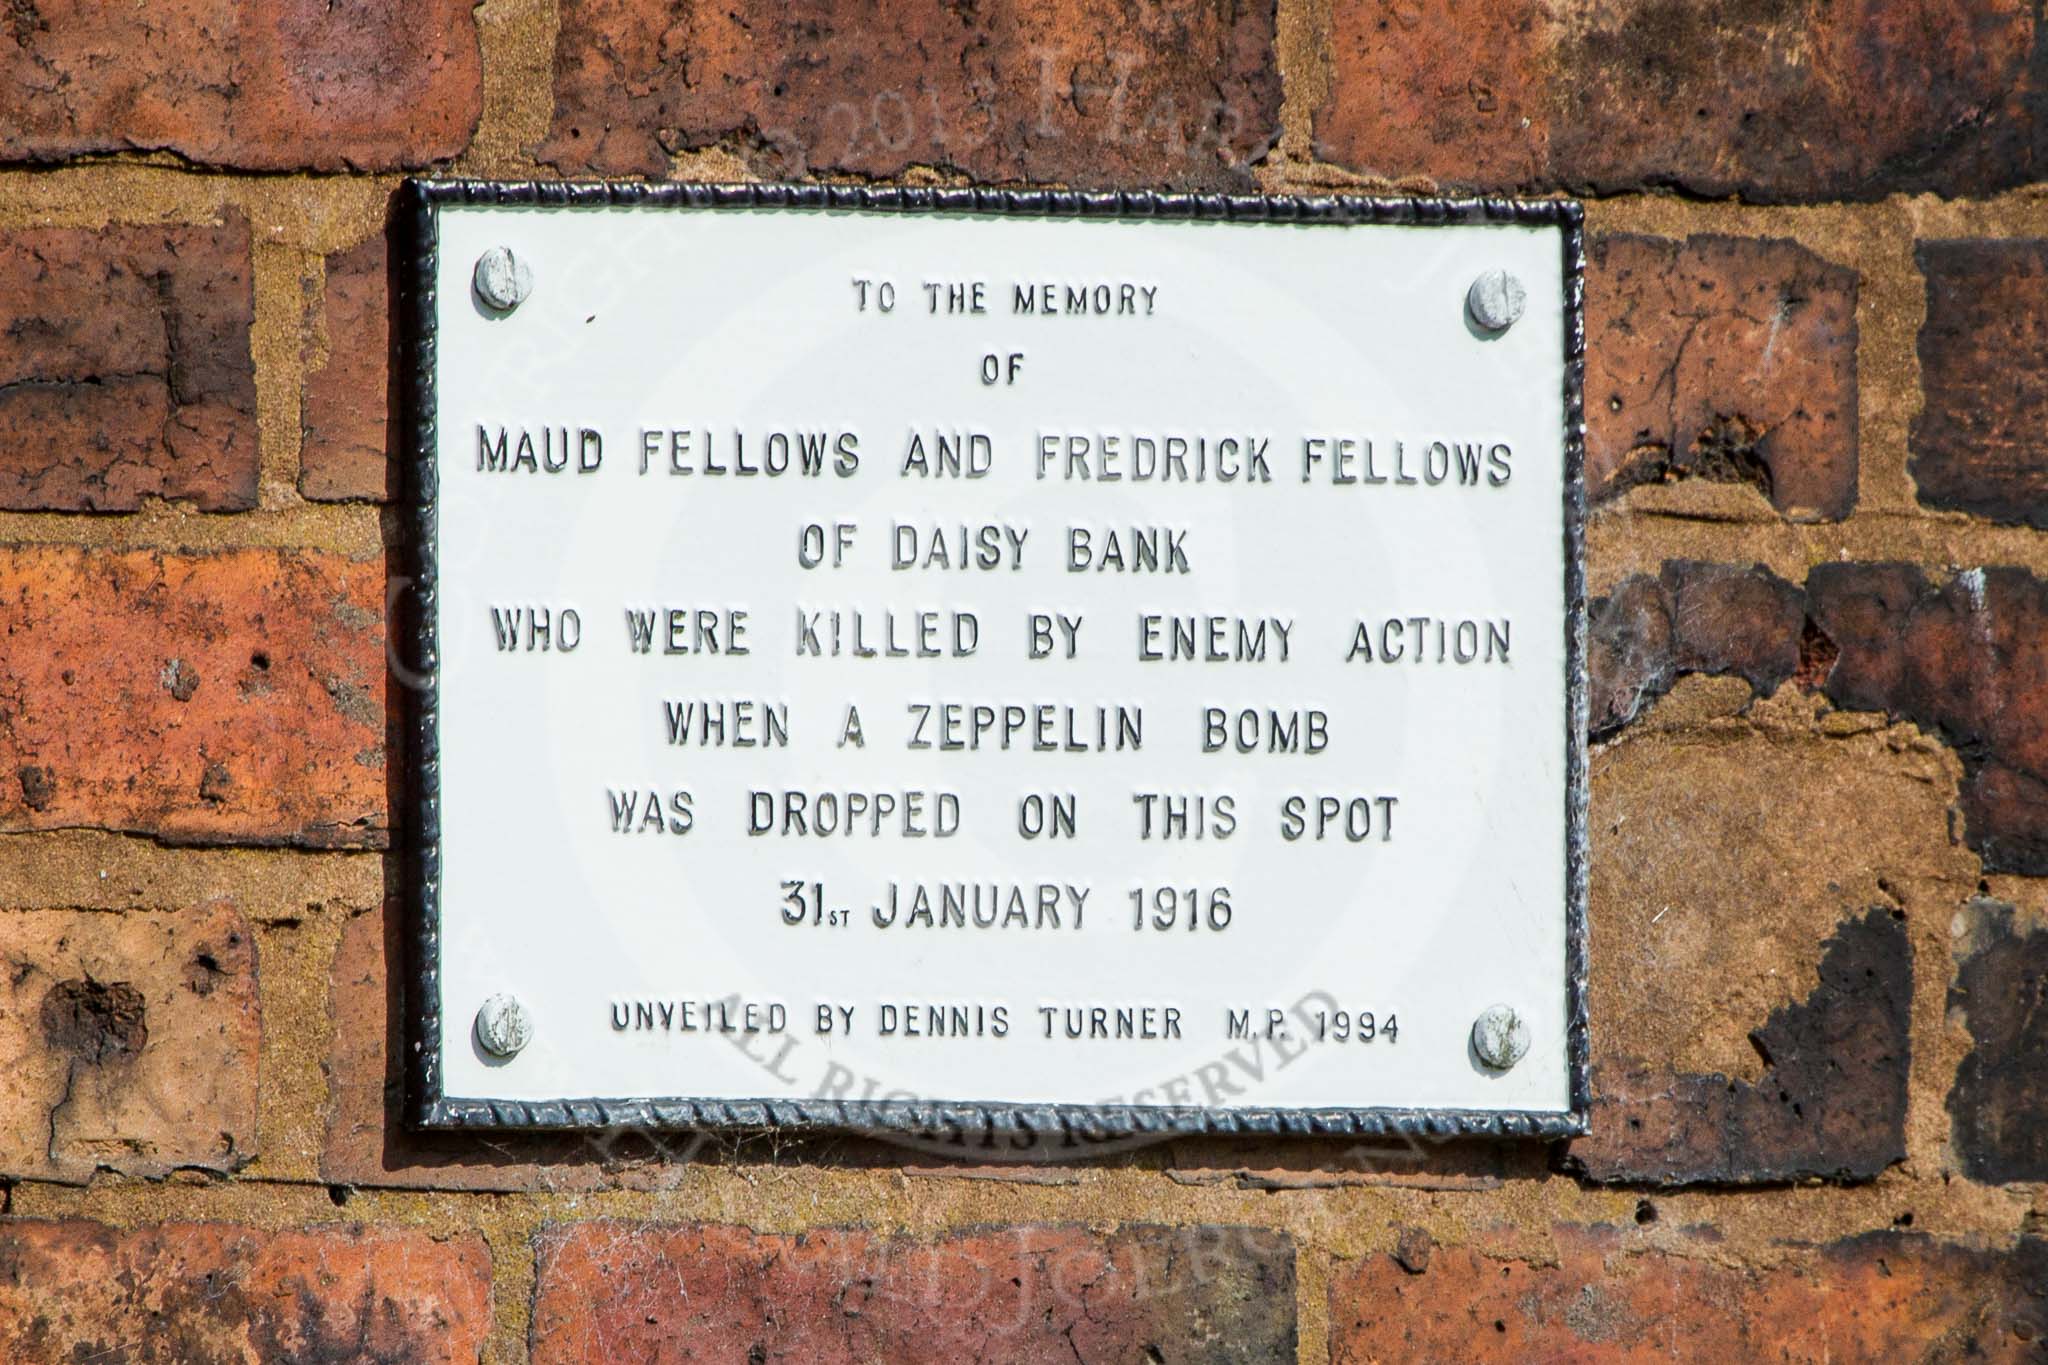 BCN Marathon Challenge 2013: A plaque at Bradley Workshops, commemorating victims of the First World War. It reads "To the memory of Maud Fellows and Frederick Fellows of Daisy Bank who were killed by enemy action when a Zeppelin bomb was dropped on this spot 31st January 2016. Unveiled by Dennis Turner M.P. 1994..
Birmingham Canal Navigation,


United Kingdom,
on 25 May 2013 at 16:26, image #241